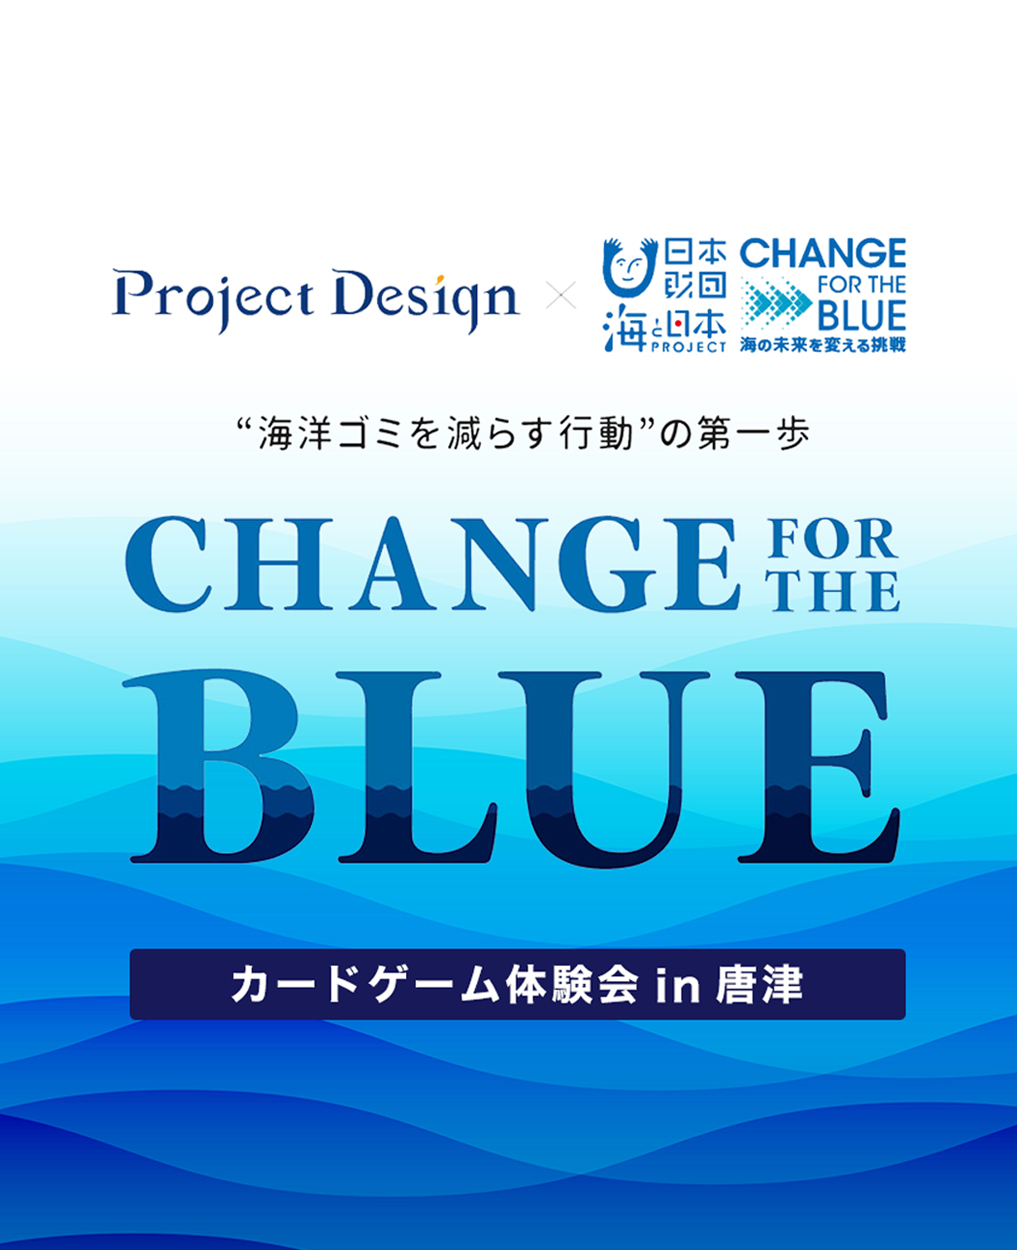 "CHANGE FOR THE BLUE" カードゲーム体験会 in 唐津